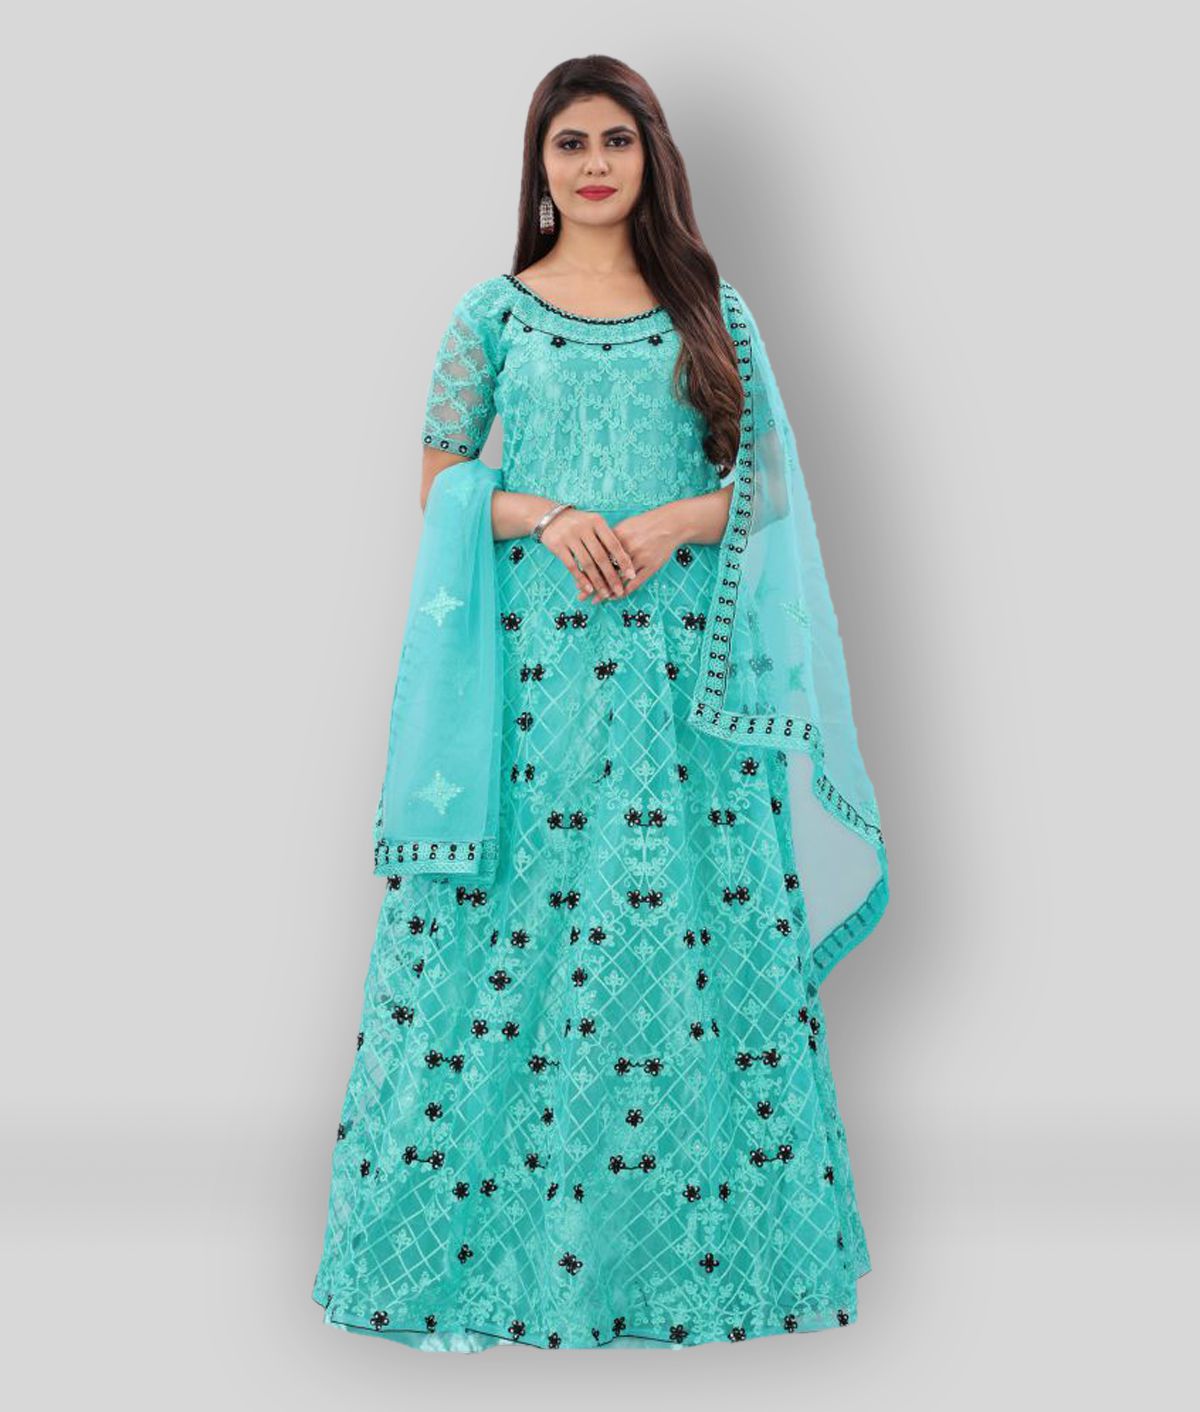     			JULEE - Turquoise Anarkali Net Women's Stitched Ethnic Gown ( Pack of 1 )